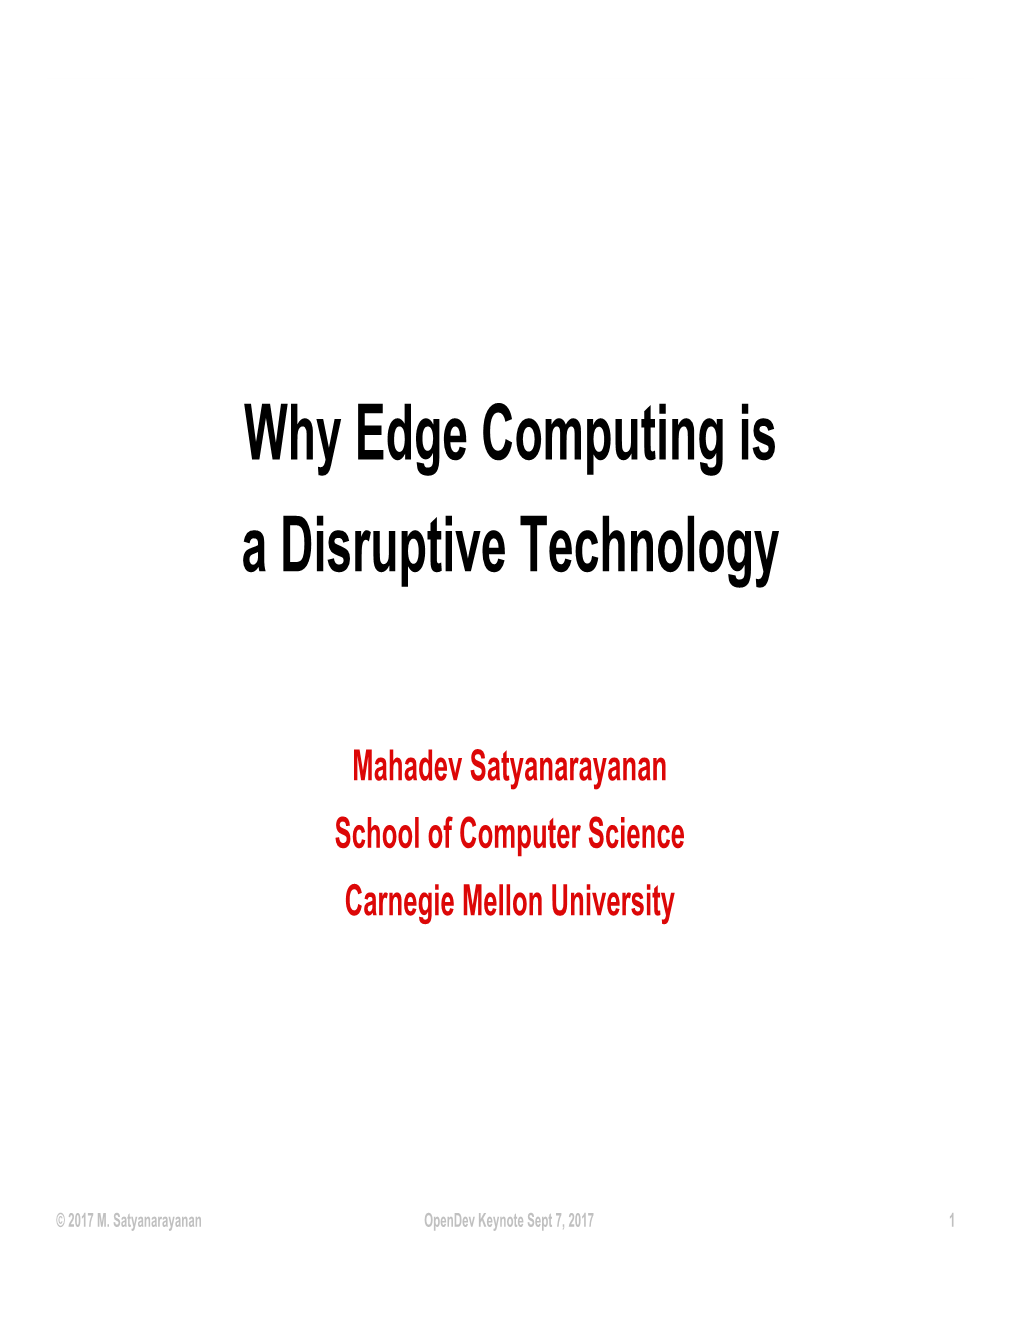 Why Edge Computing Is a Disruptive Technology